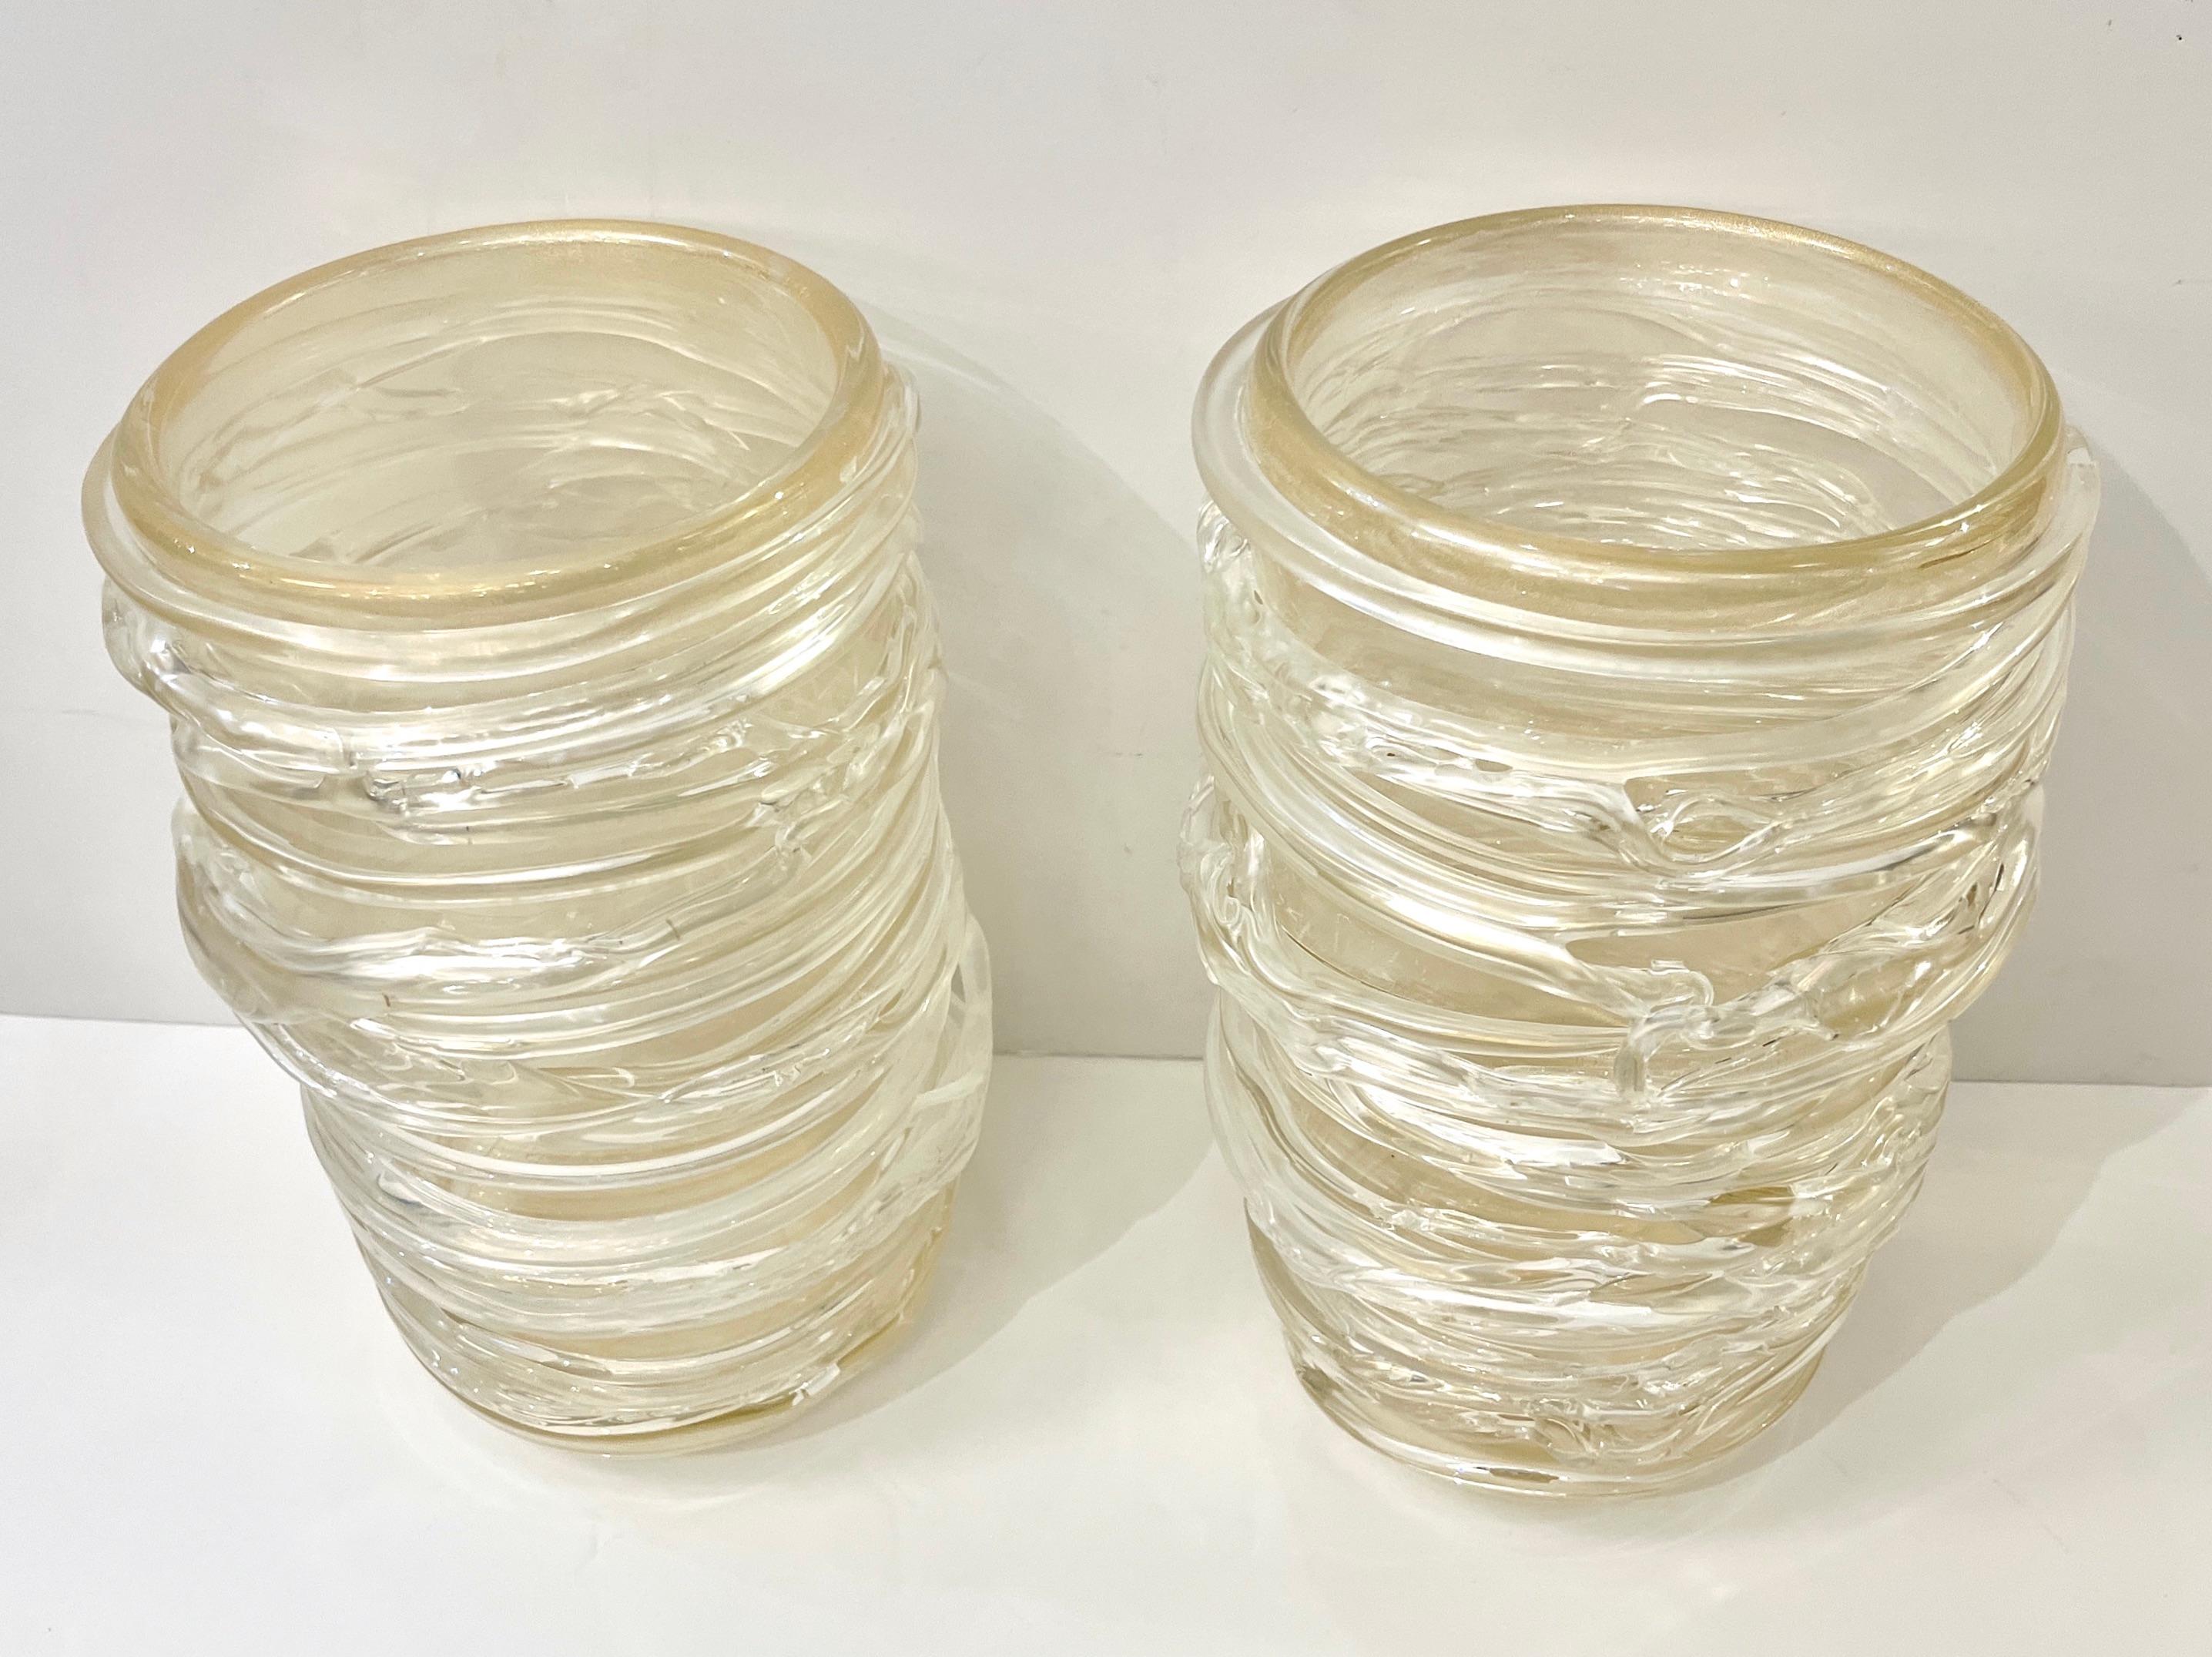 Stunning high-quality Murano glass vases, the body decorated with a post-modern decor, wrapped in iridescent crystal clear glass threads, freely hand applied in a delicate raised pattern creating sculpture pieces of art. The inner body has